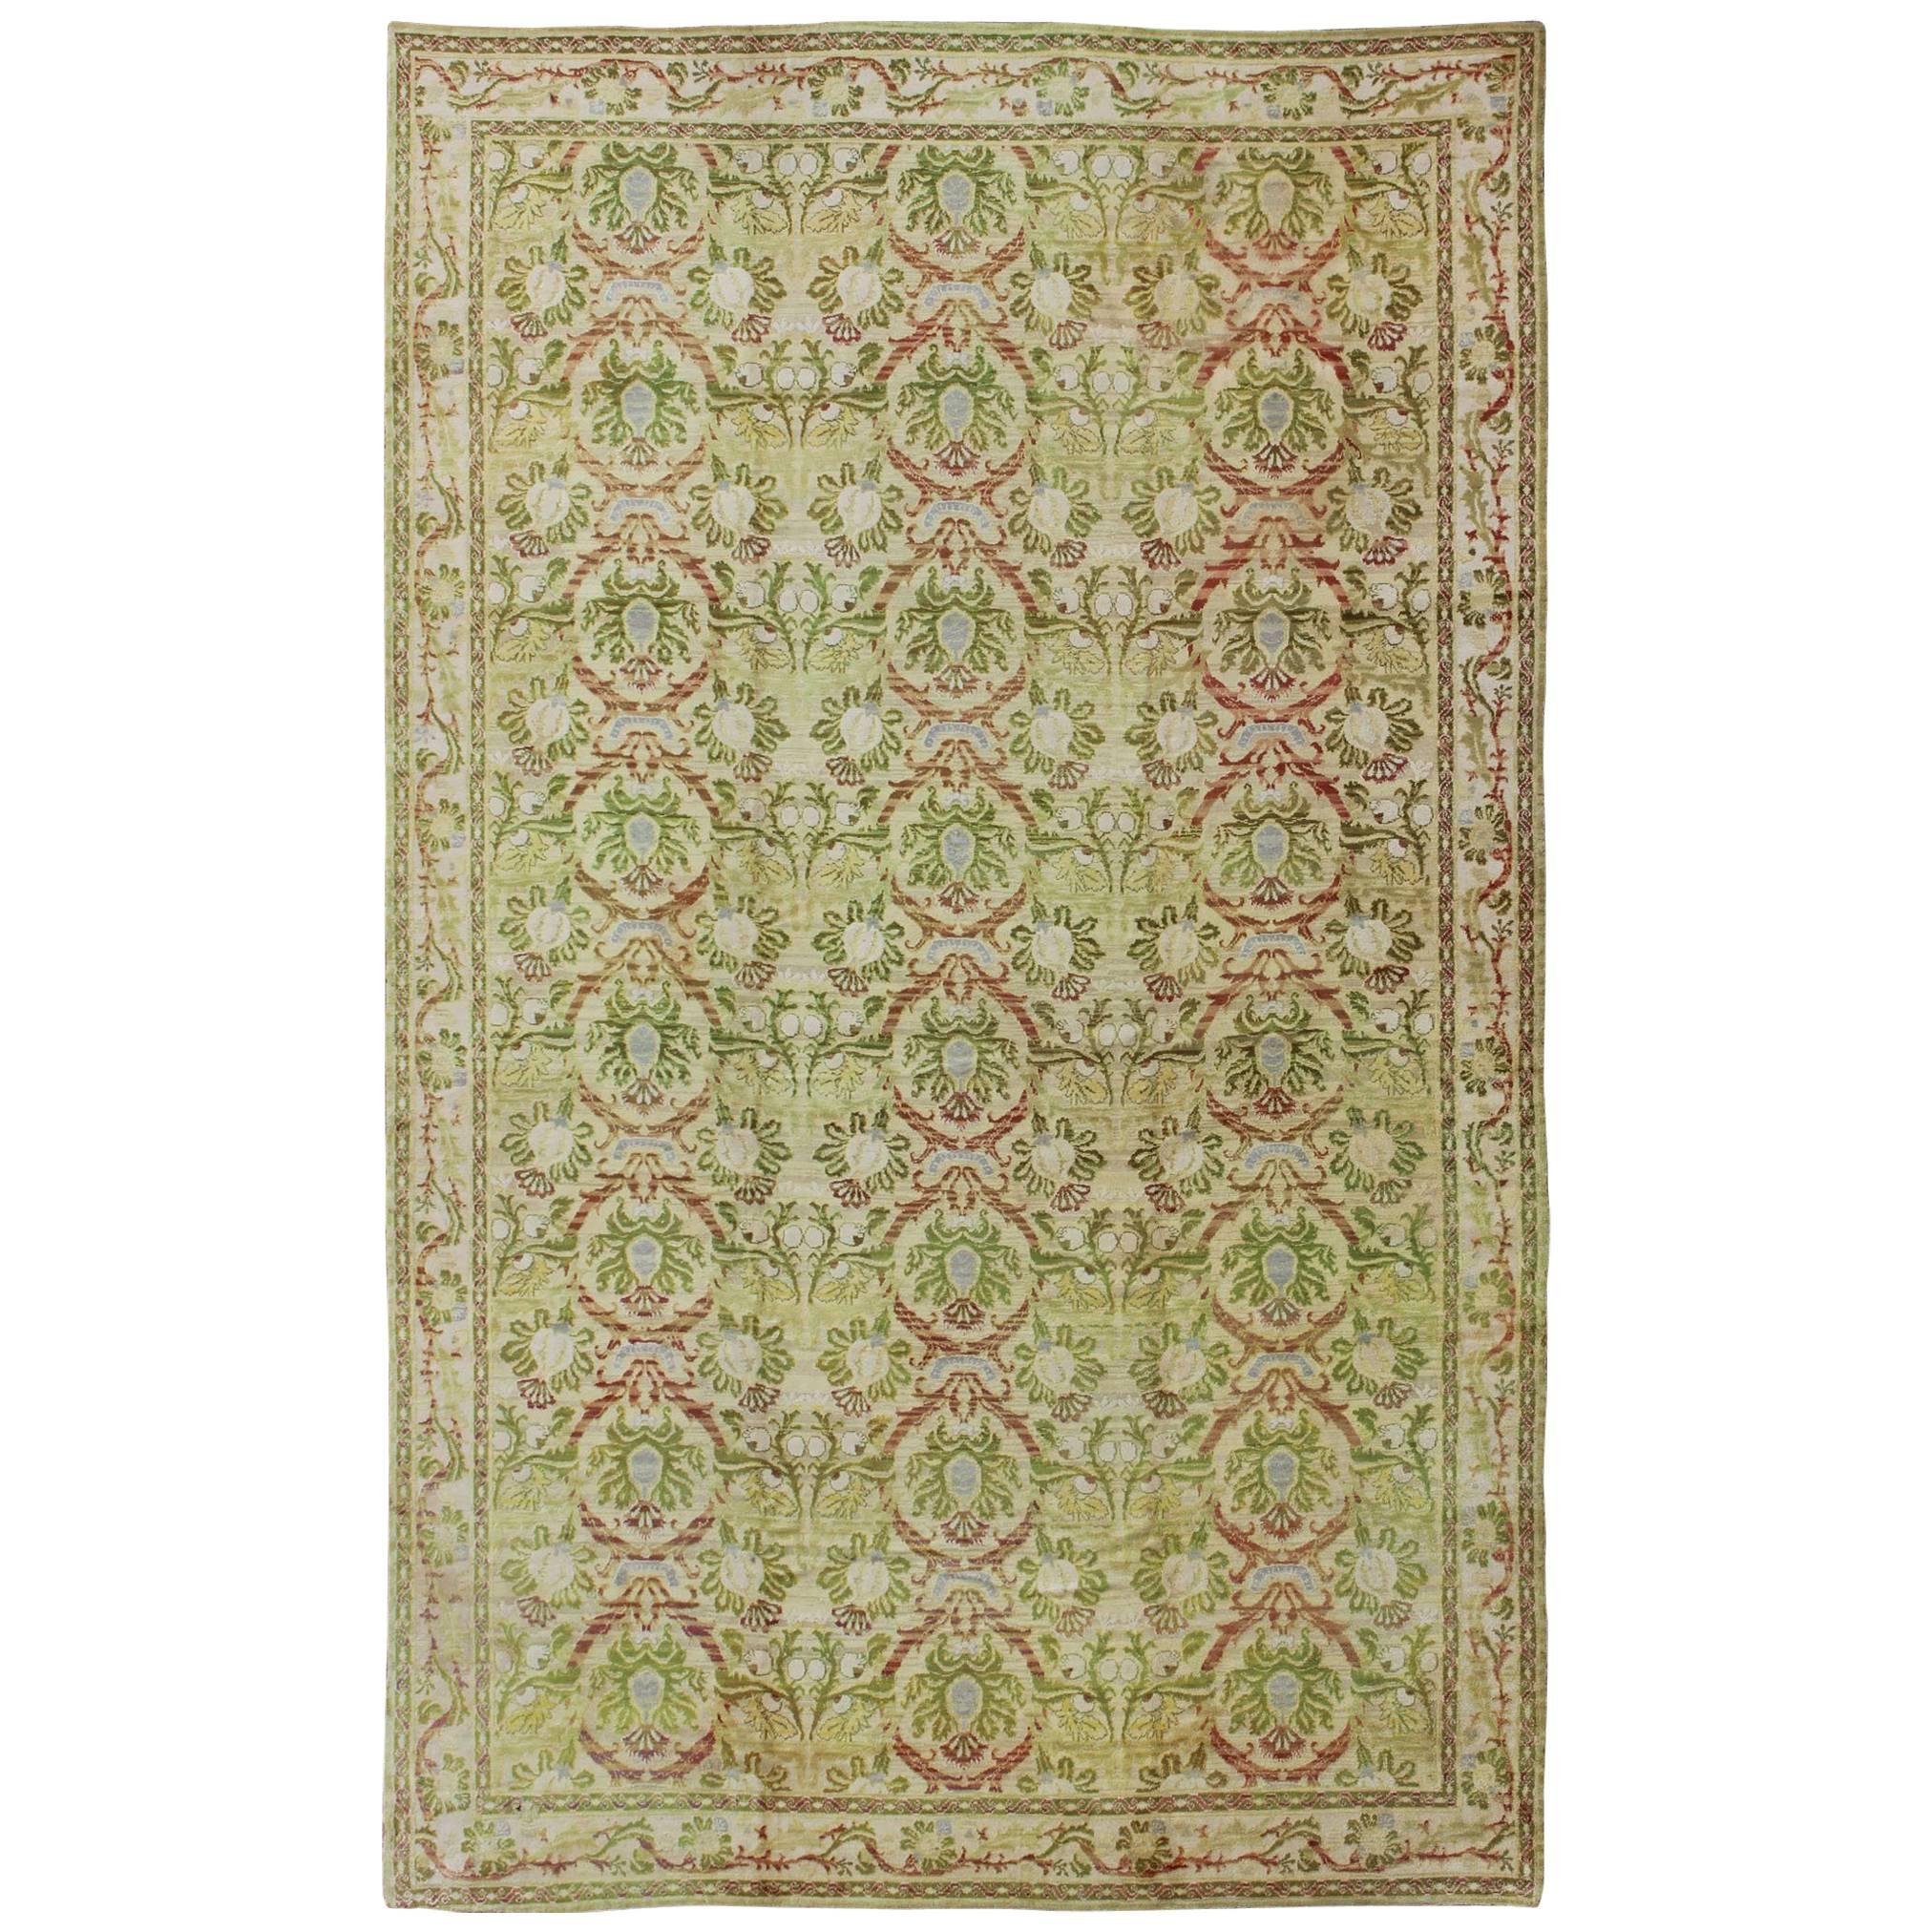 Large Antique Spanish Rug with Circular Medallions in Various Green Tones  For Sale